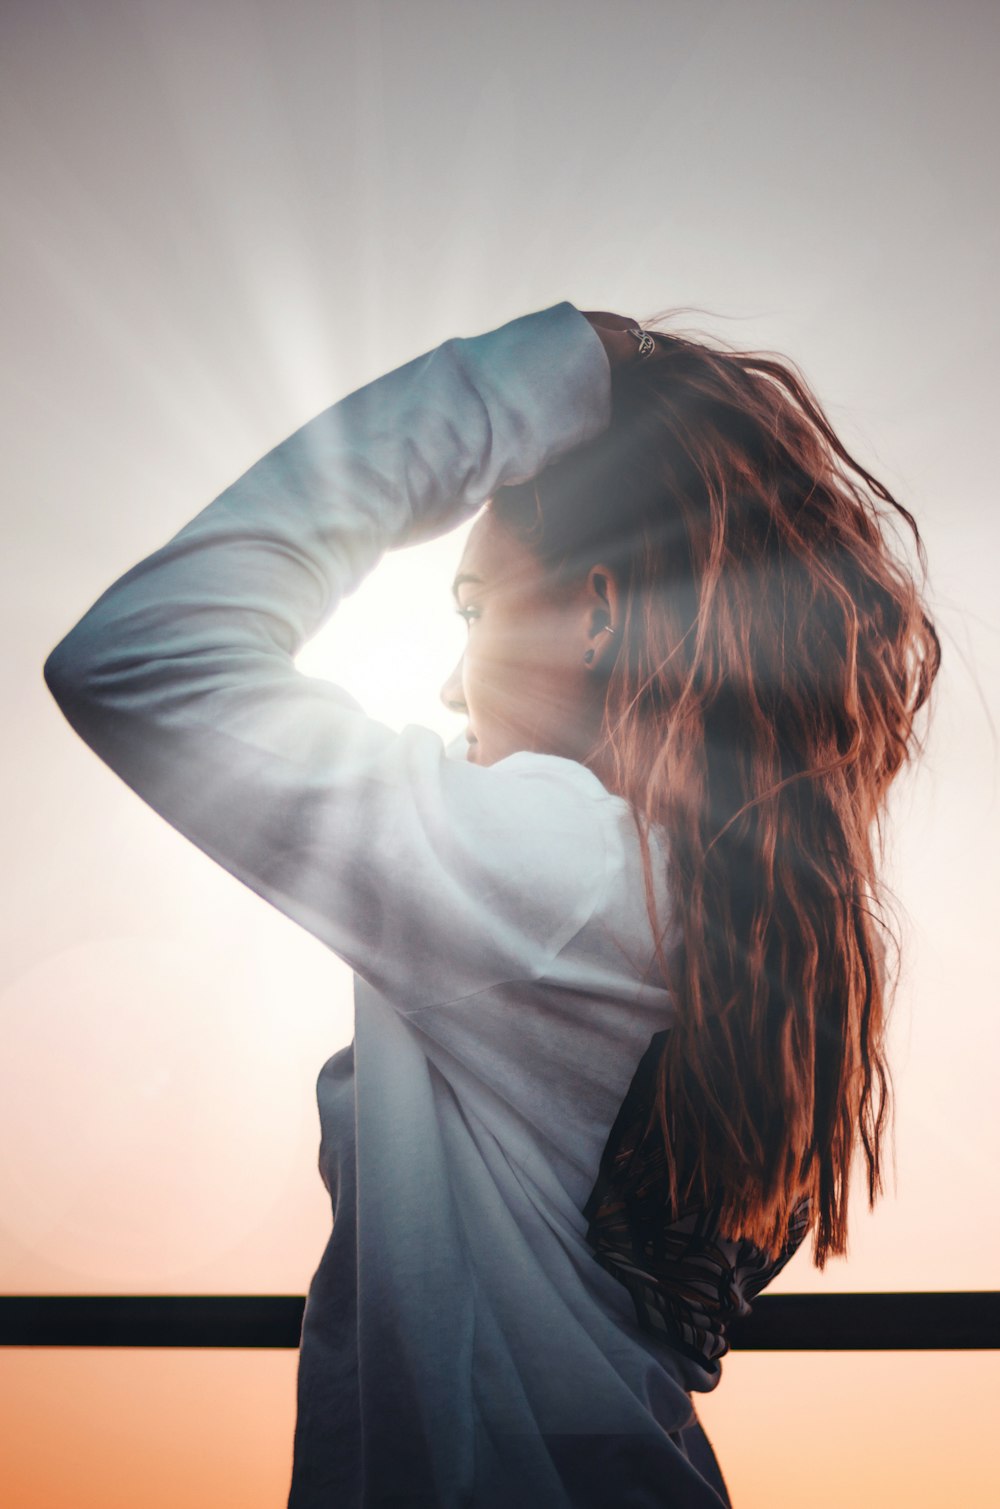 woman holding her hair during sunset